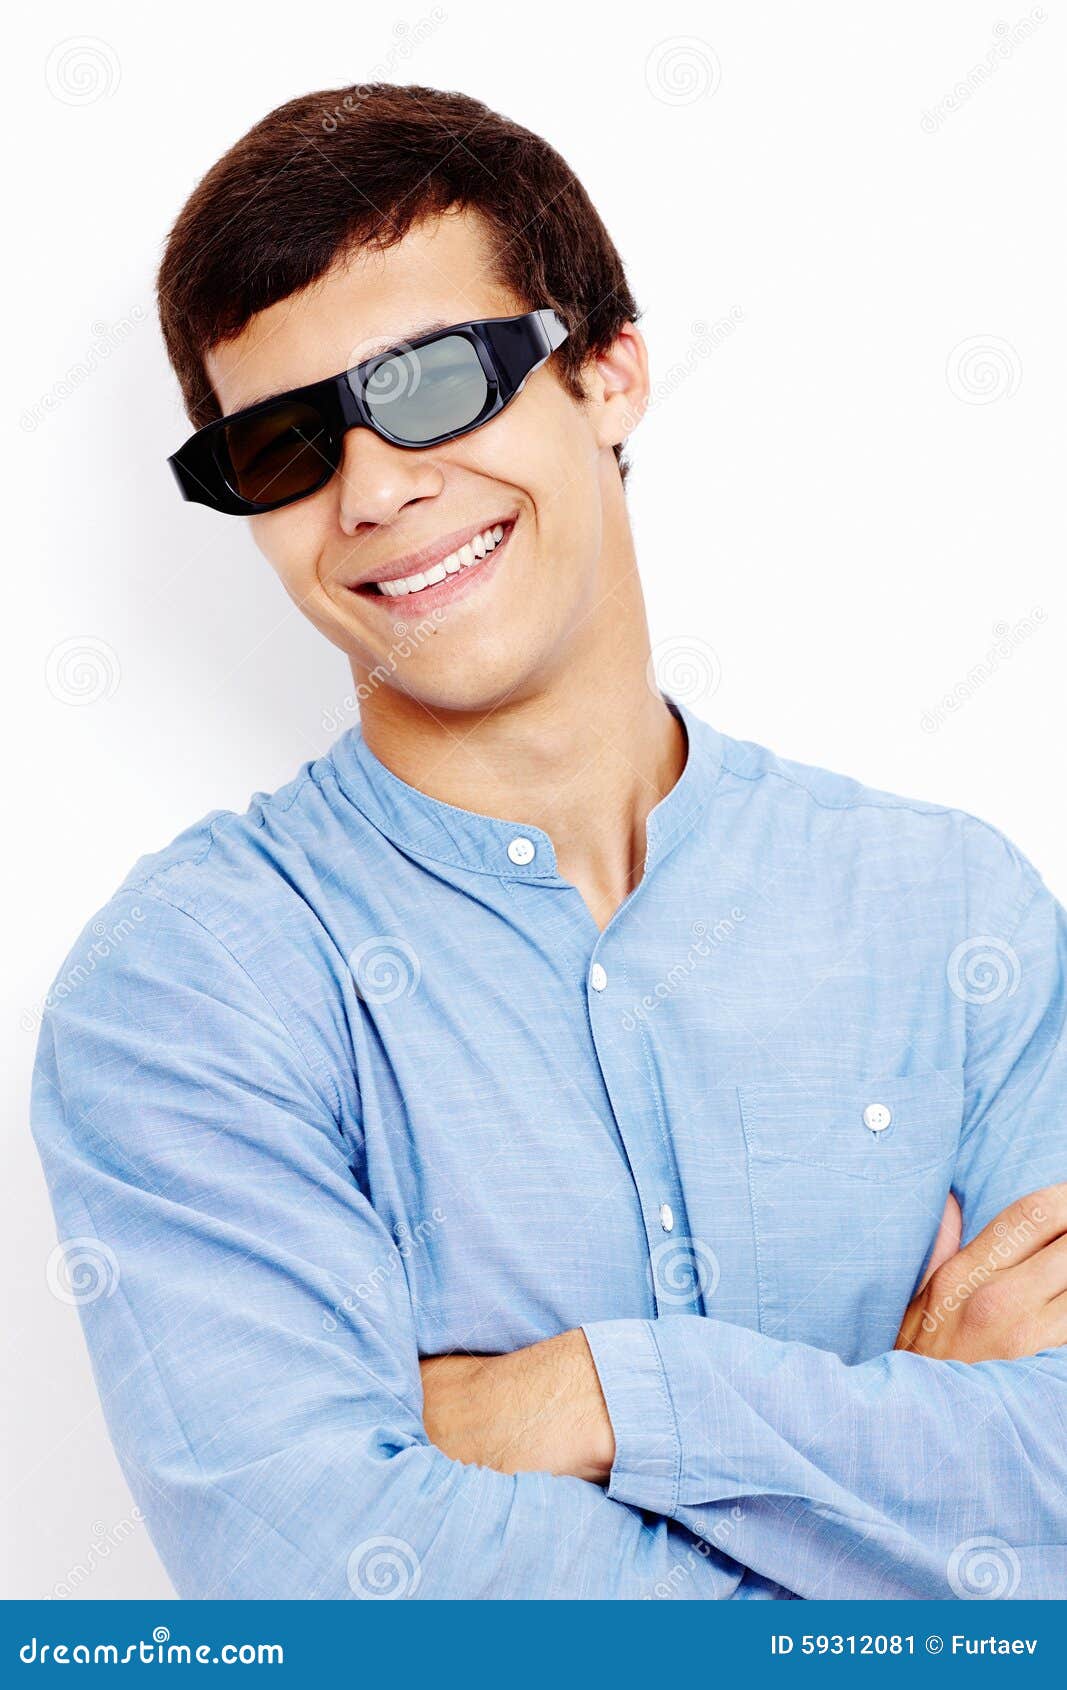 Guy in 3D Glasses with Crossed Arms Stock Image - Image of arms ...